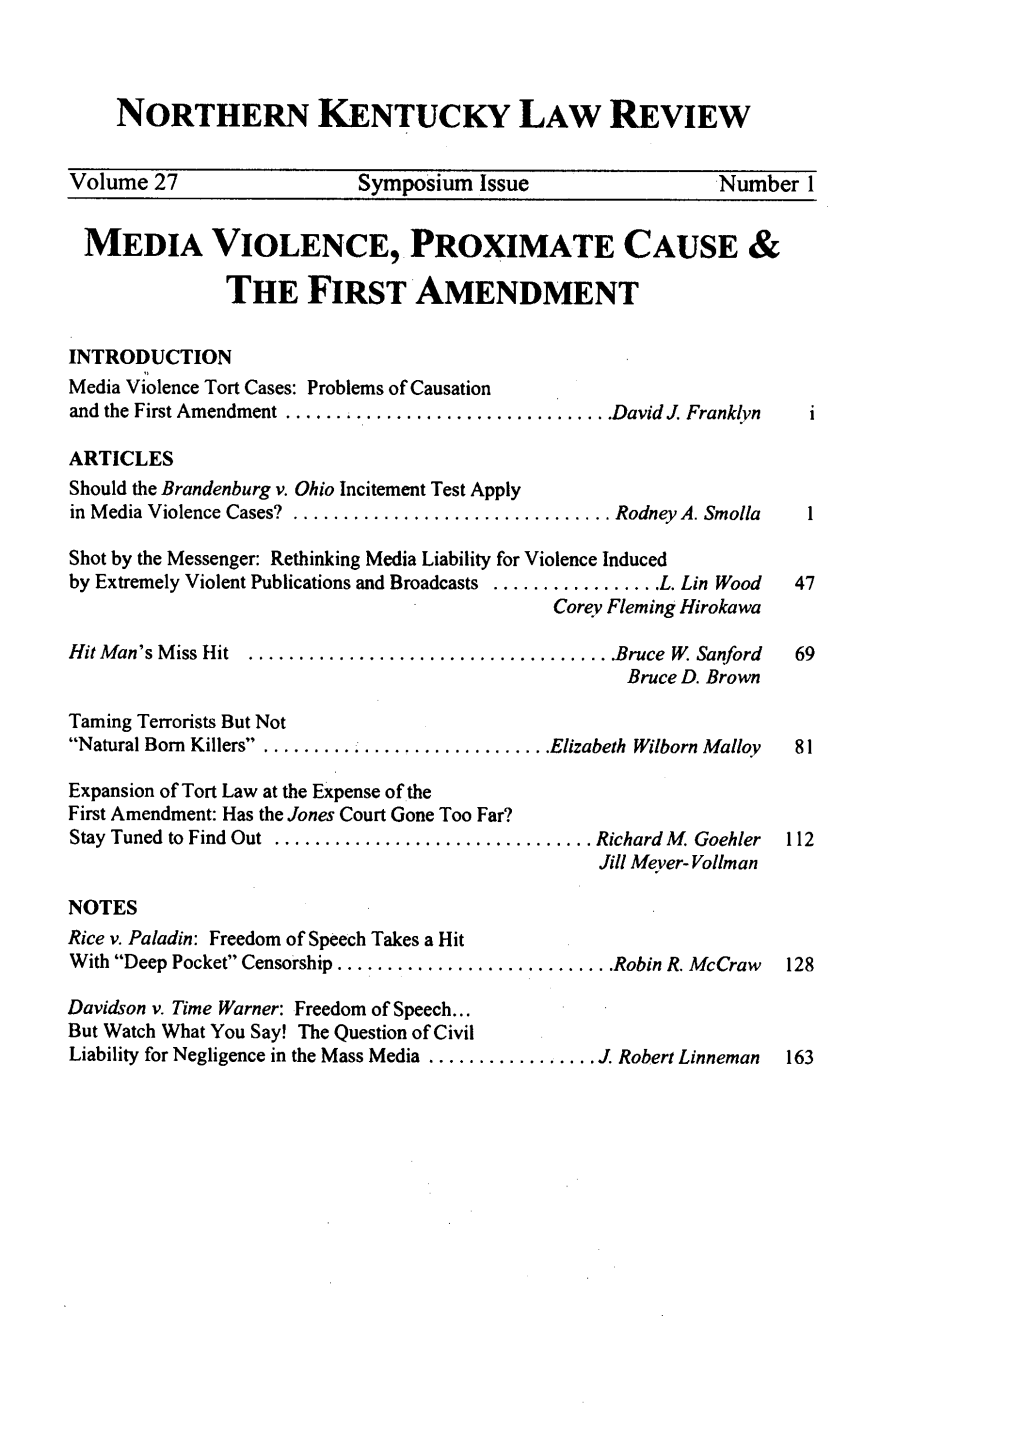 Media Violence, Proximate Cause & the First Amendment